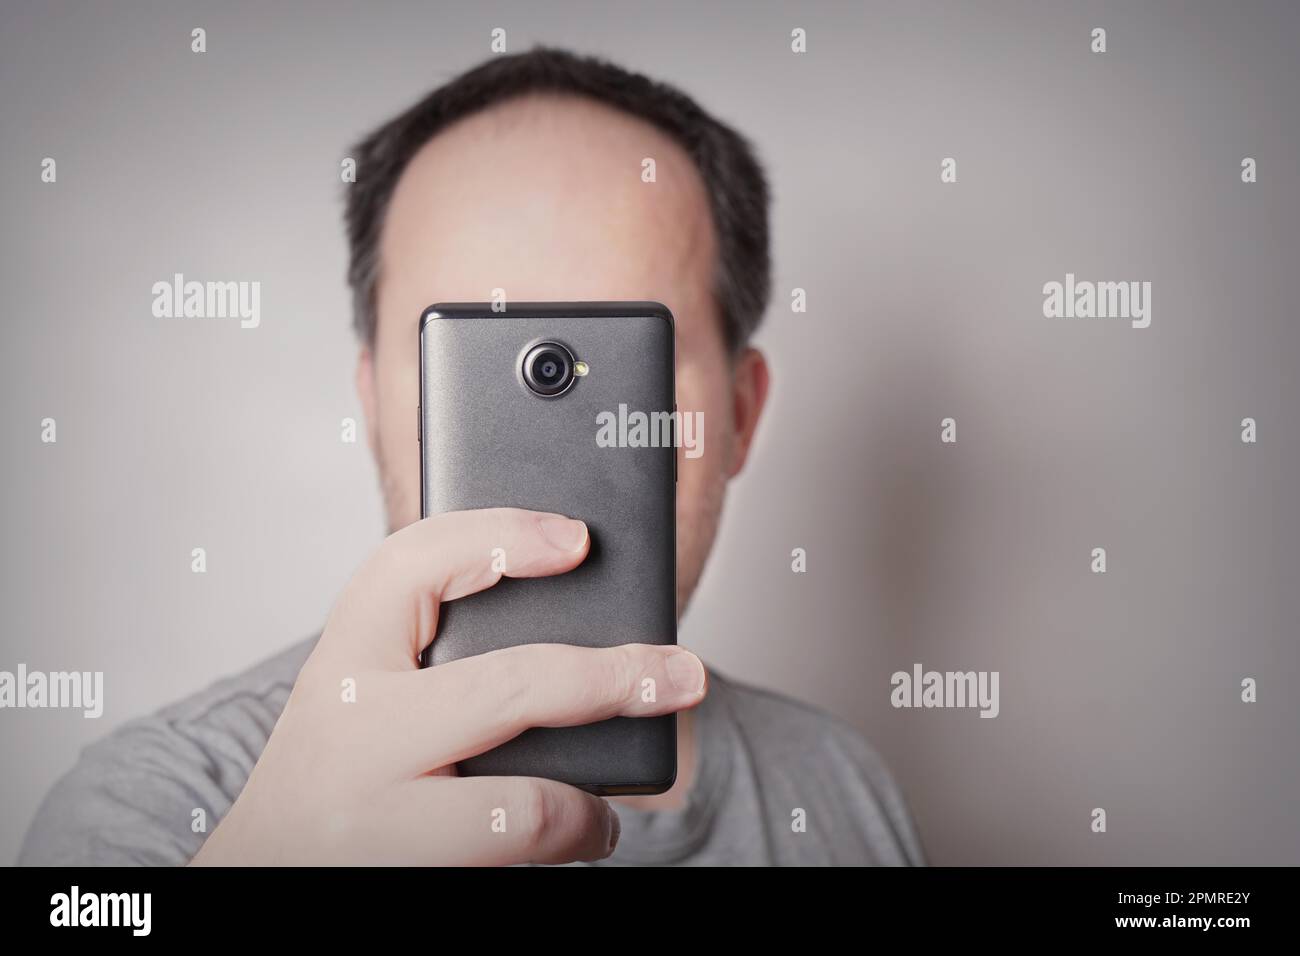 man looking at smart phone or taking selfie picture with camear mobile Stock Photo